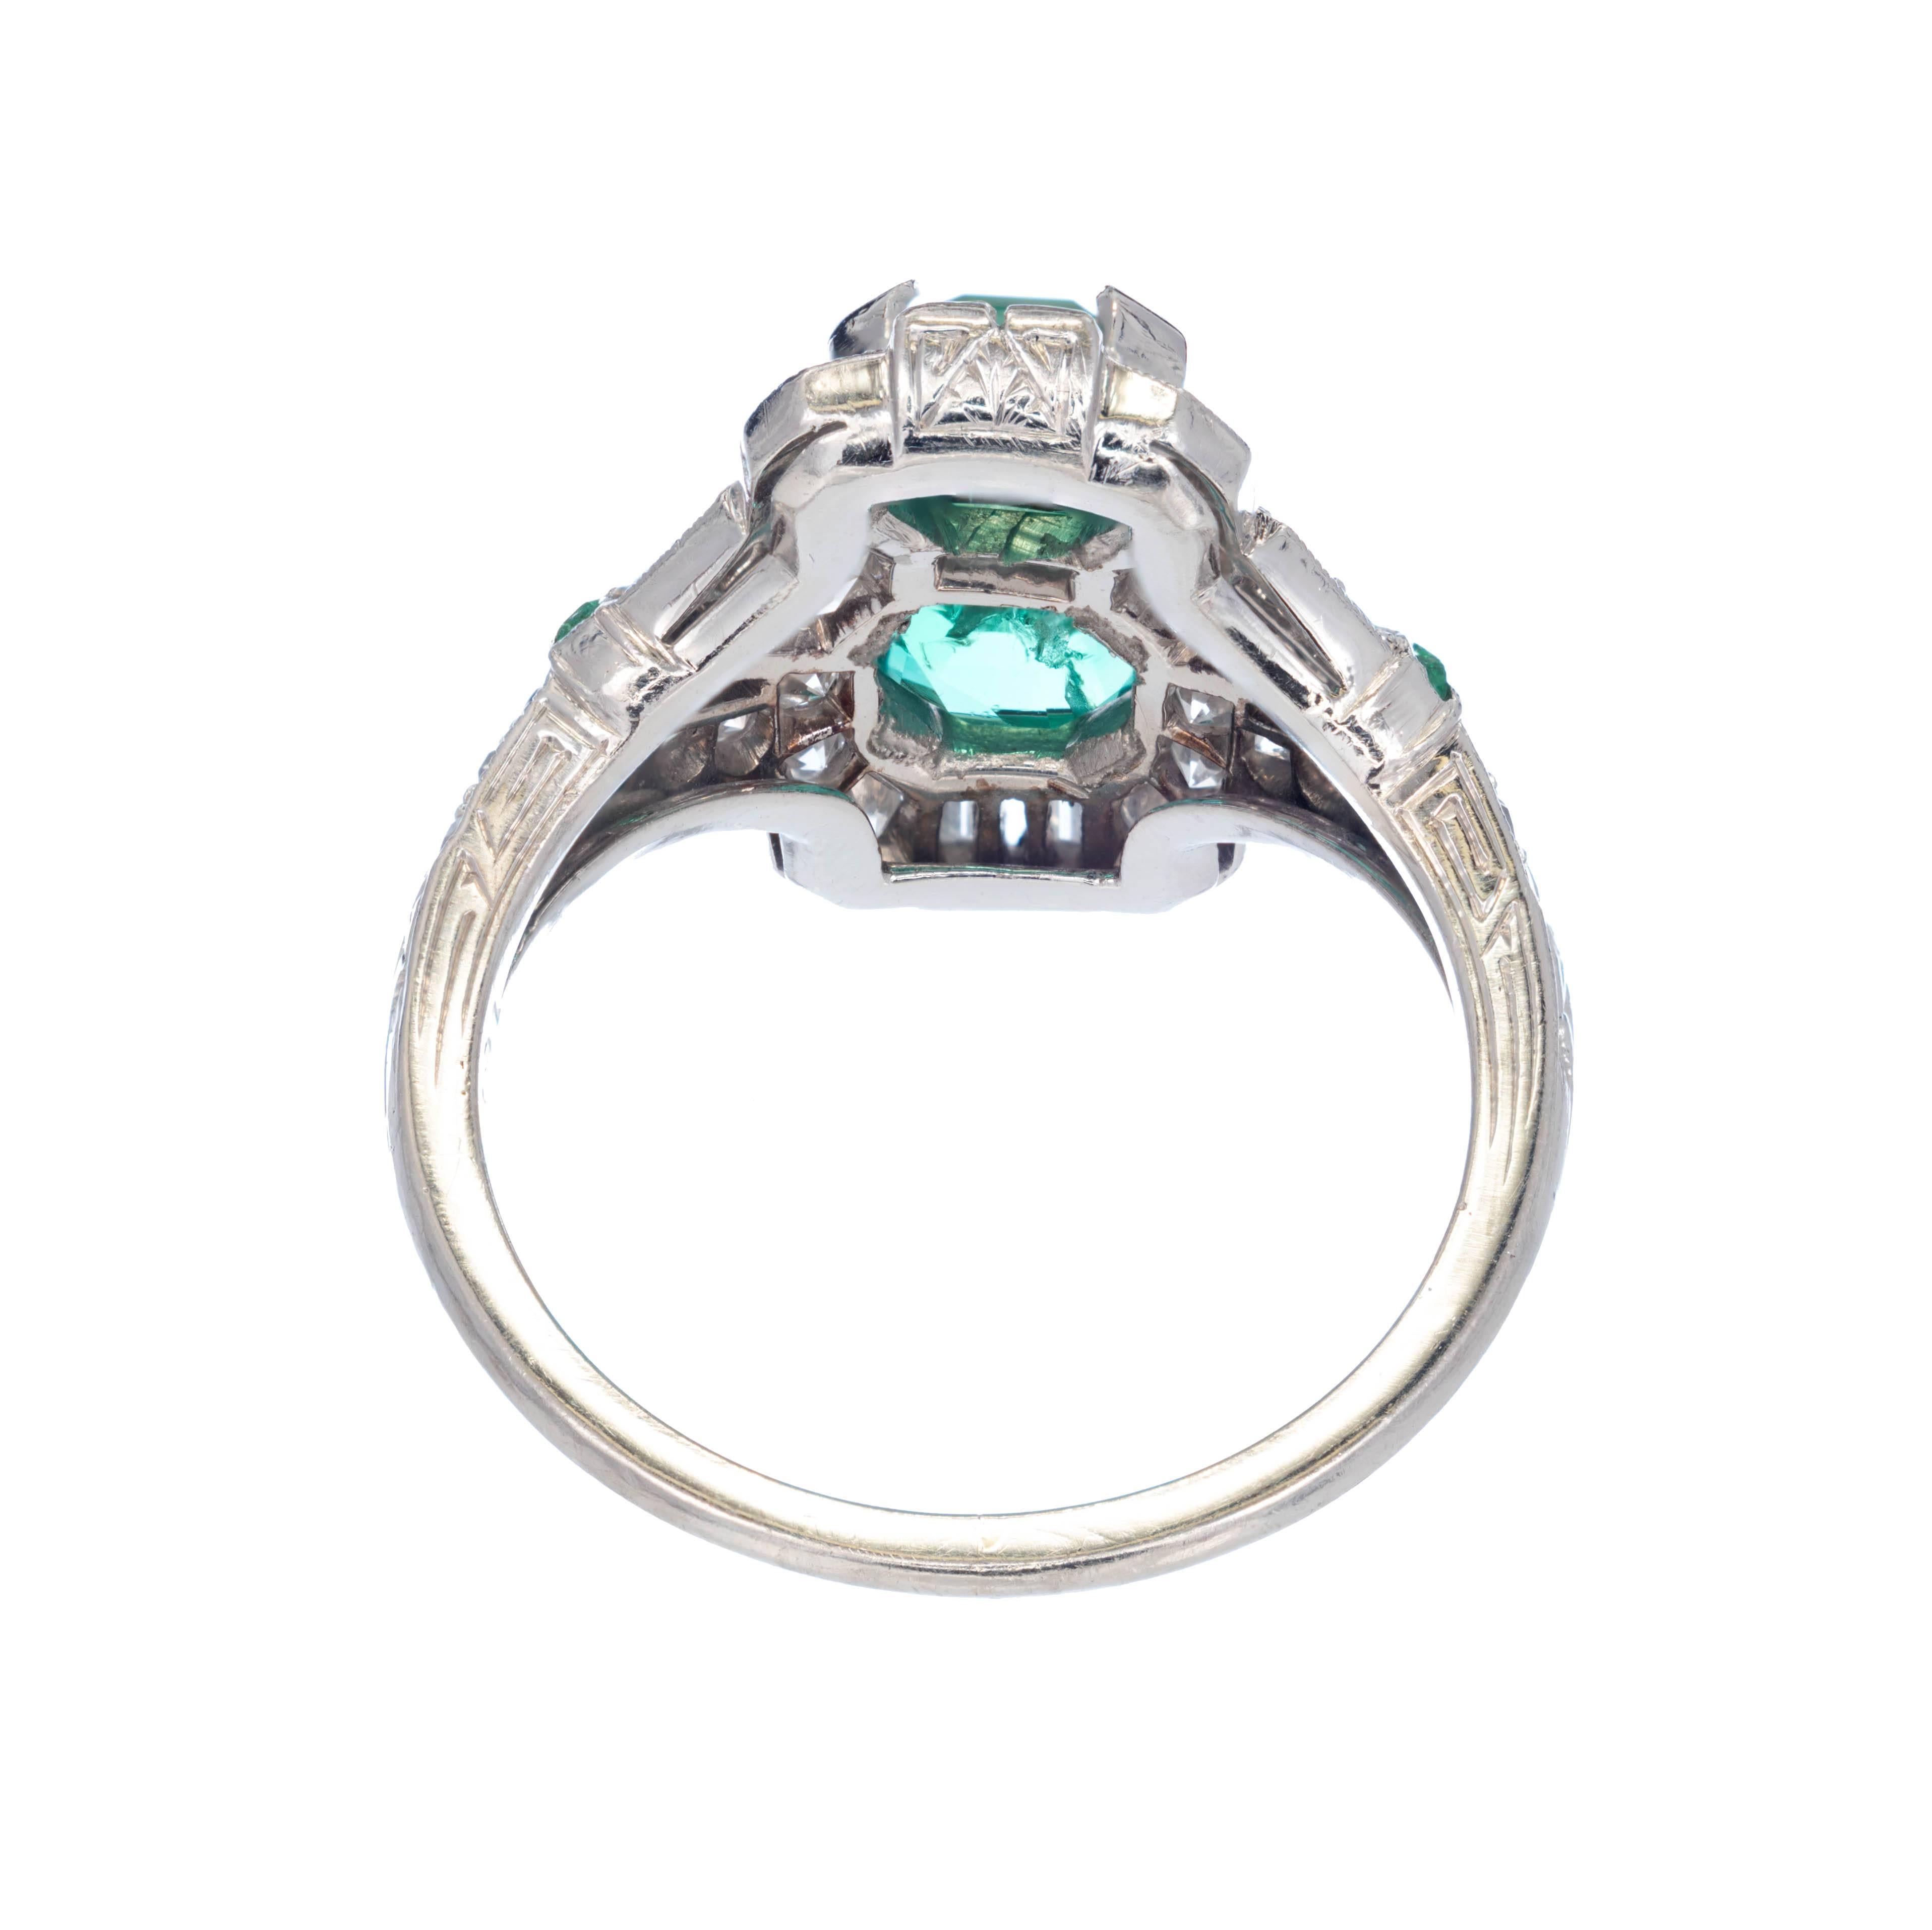 1.20 Carat Emerald Diamond Art Deco Platinum Cocktail Ring In Good Condition For Sale In Stamford, CT